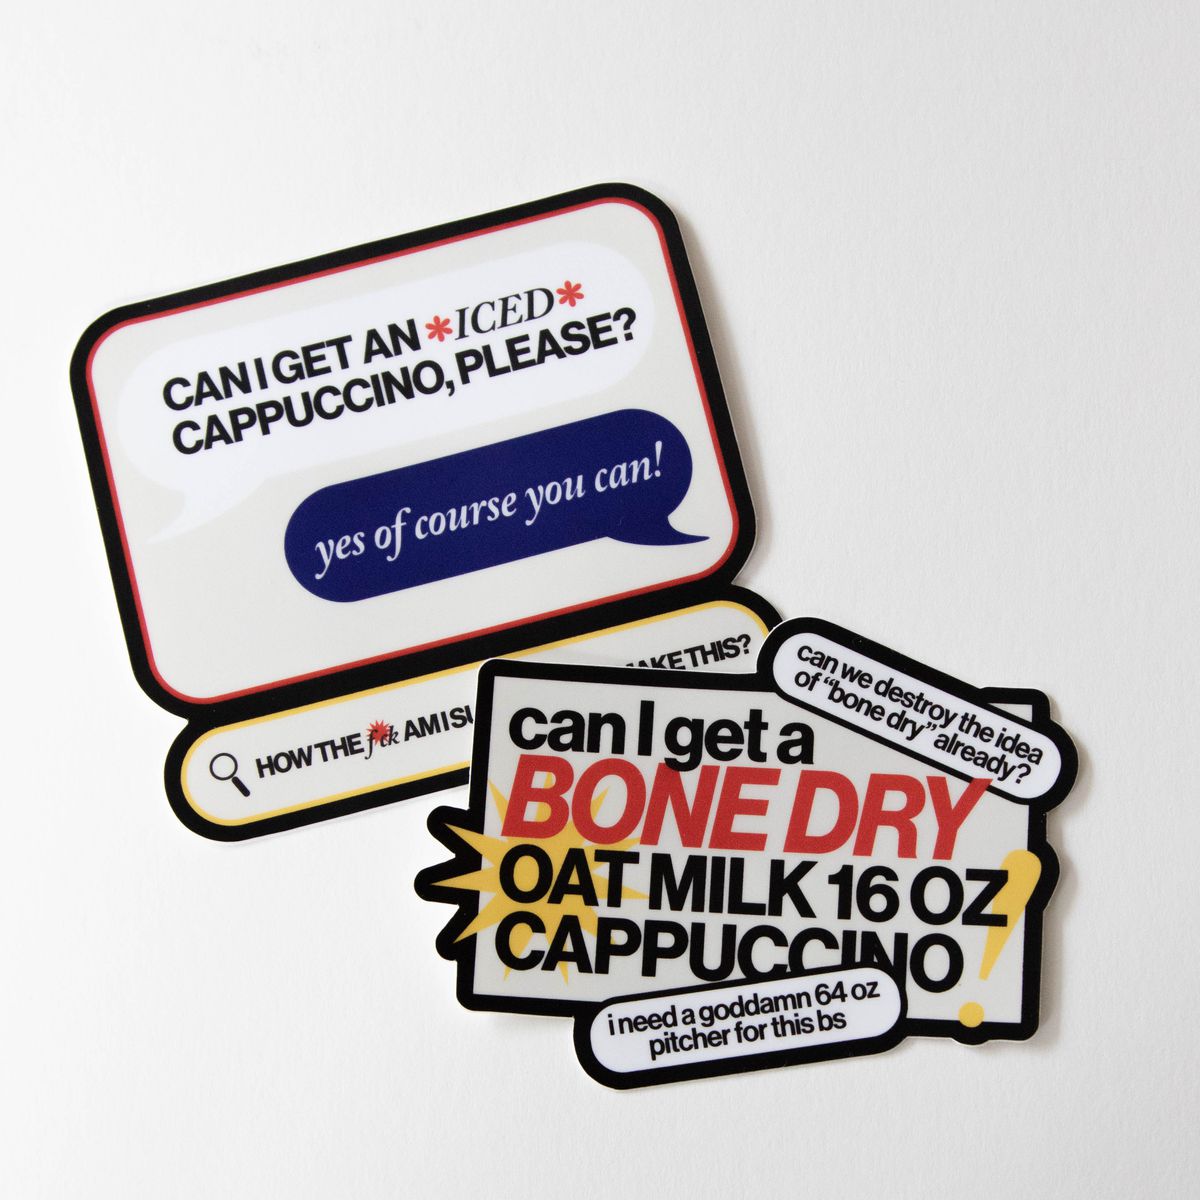 Two stickers with commentary about ordering coffee: “Can I get an *iced* cappuccino please?” and “Can I get a bone dry oat milk 16 oz cappuccino?”